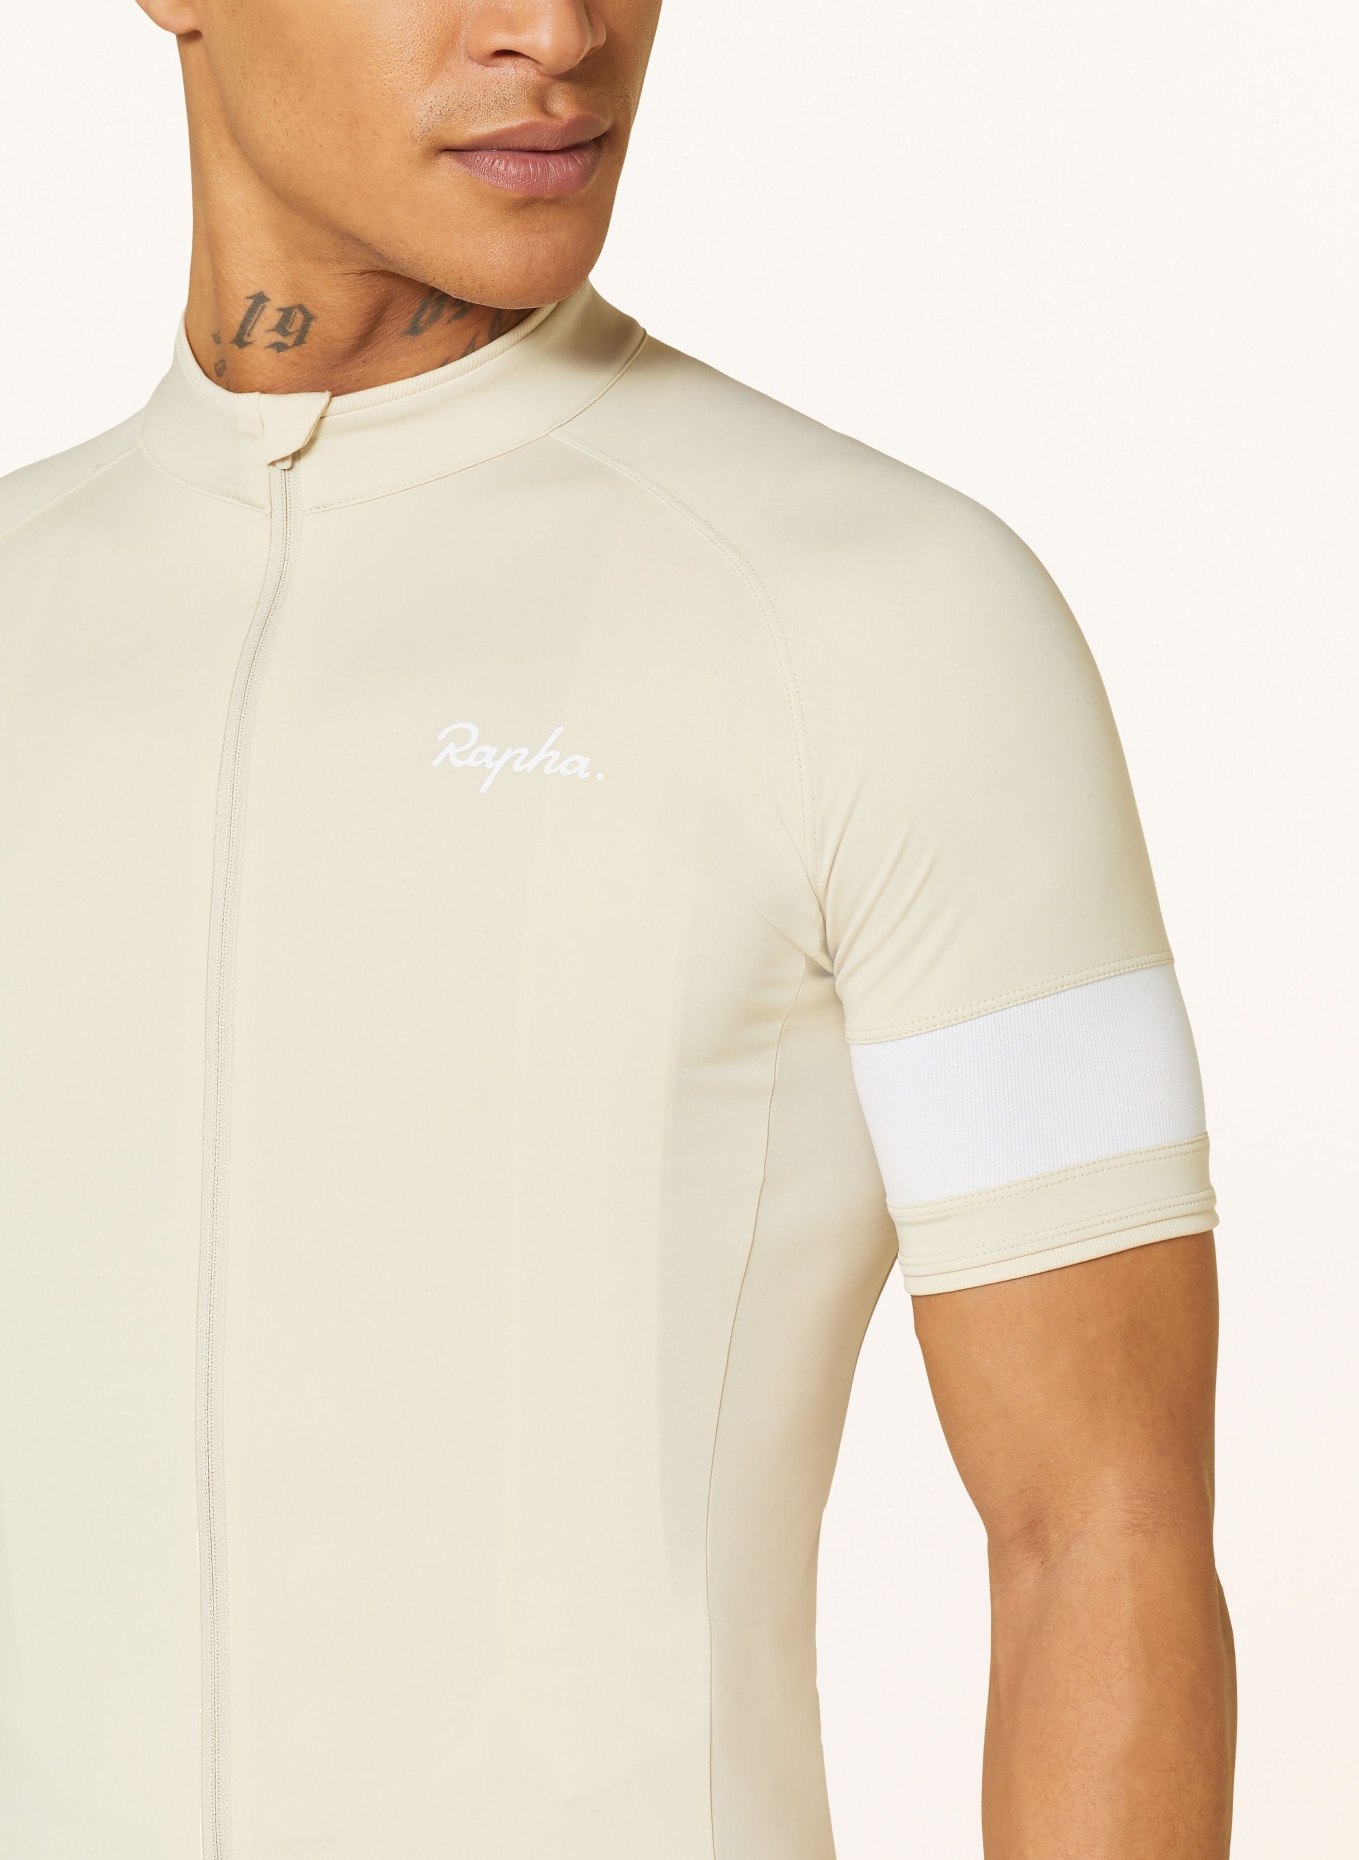 Rapha Cycling jersey CORE, Color: BEIGE (Image 4)